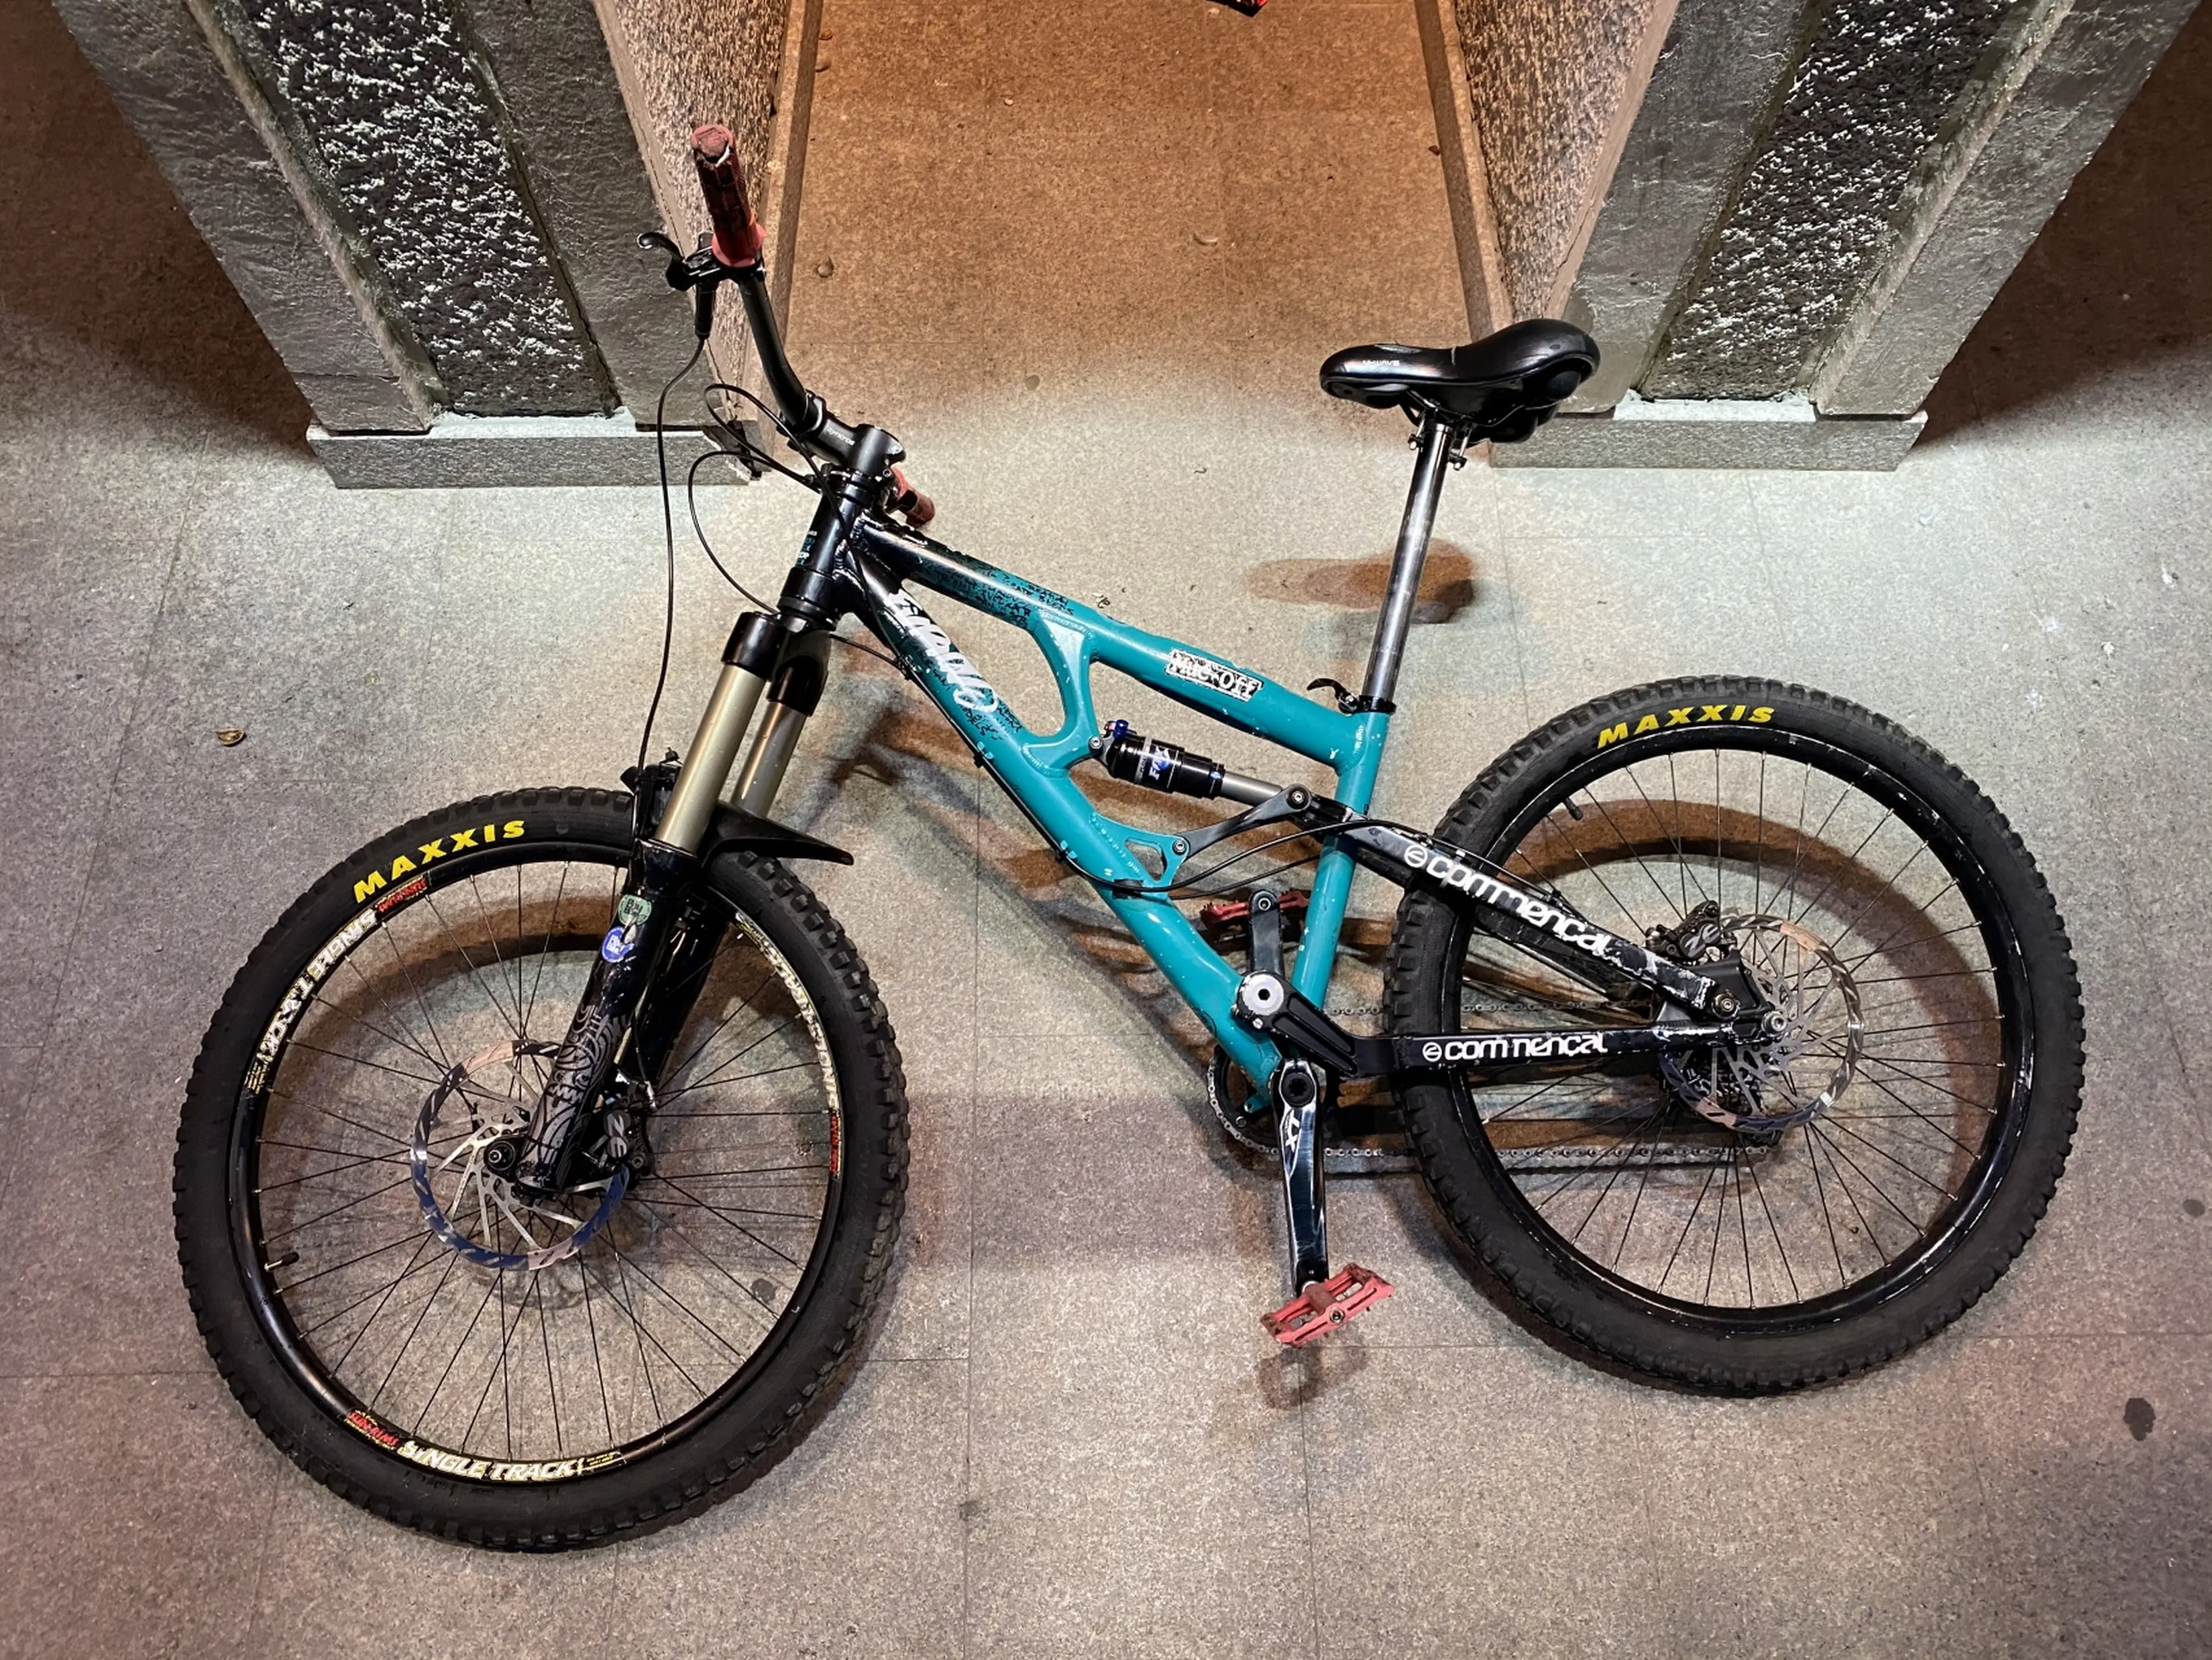 Image Bicicleta freeride downhill commencal furious